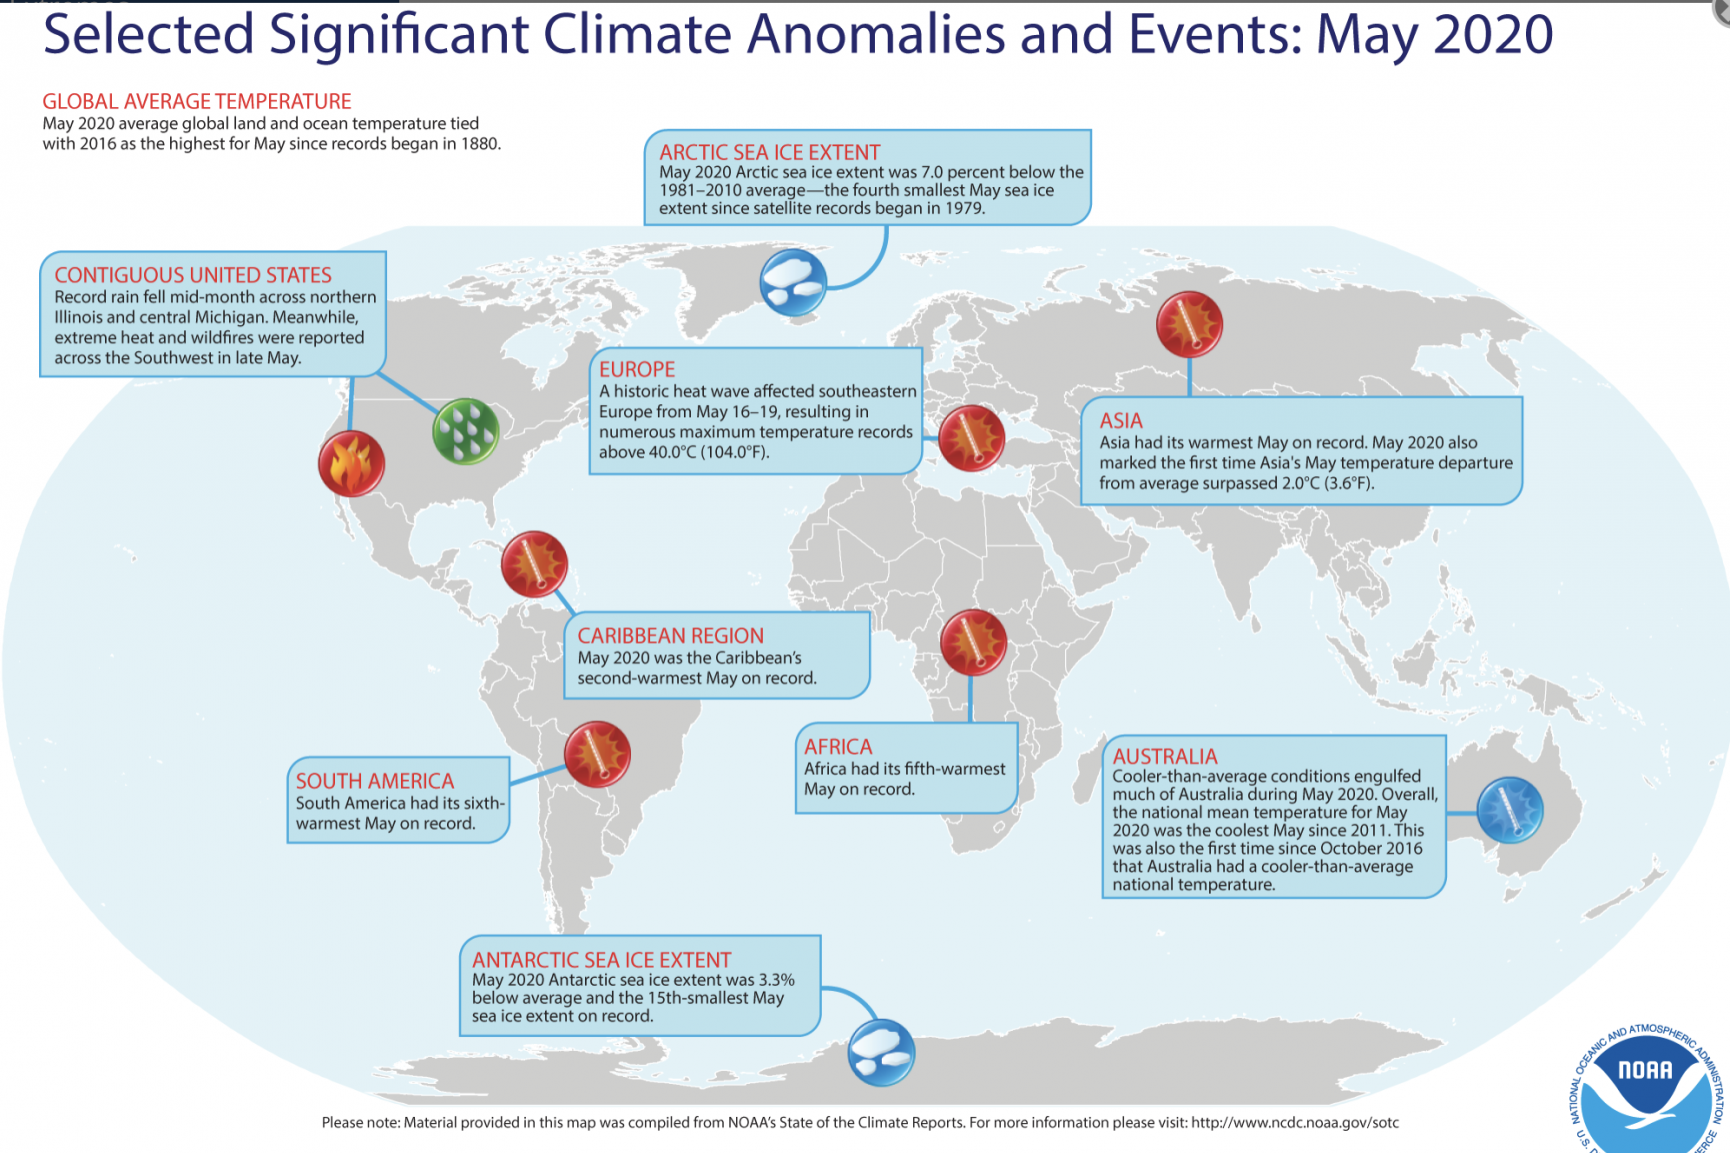 May 2020 is tied with May 2016 as the hottest since records began